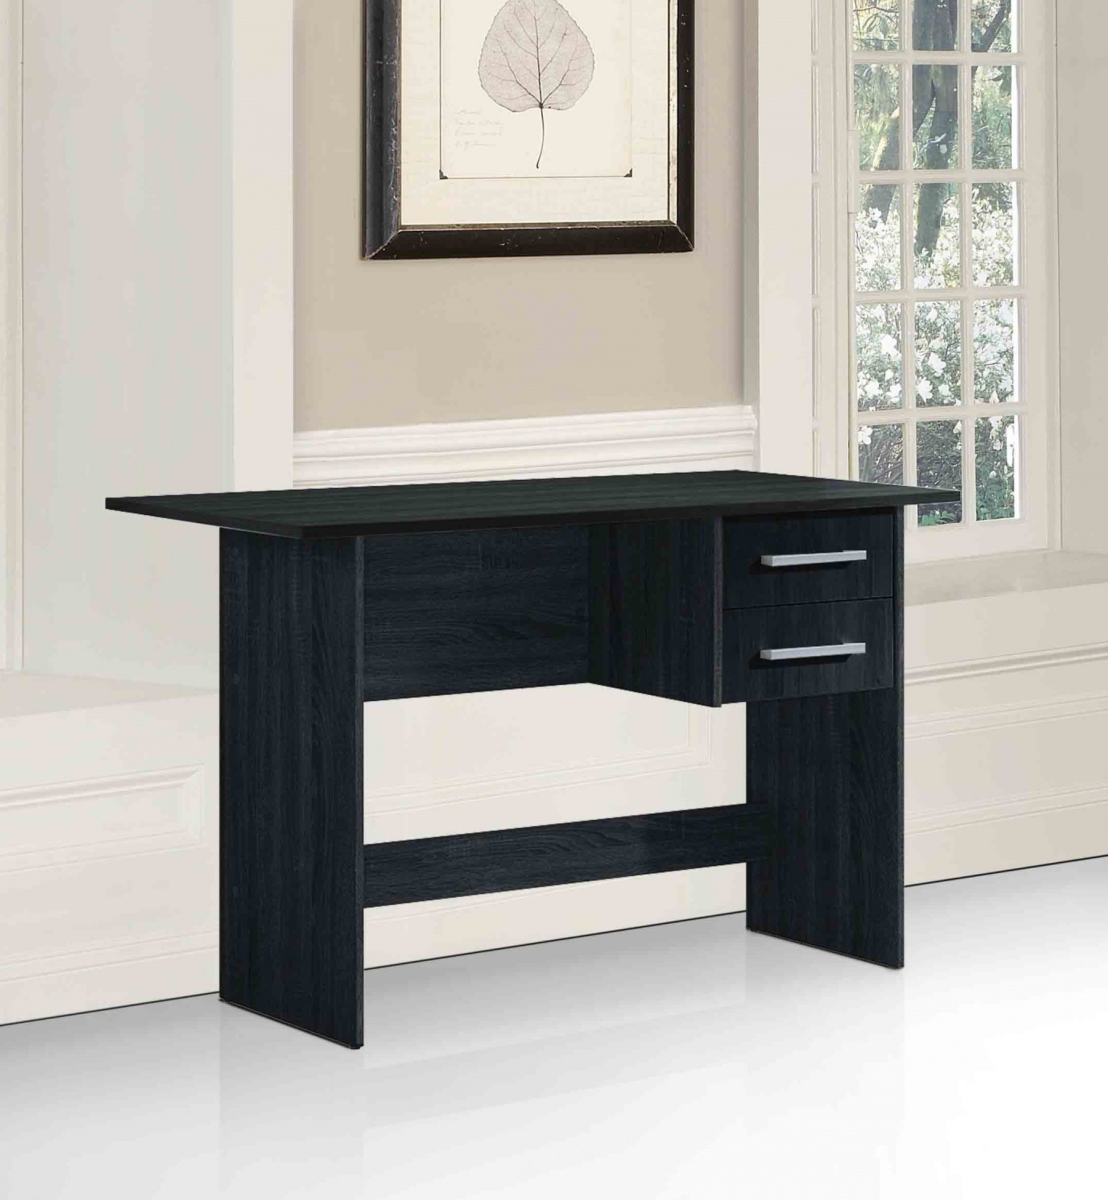 Picture of Hodedah HI425 BLACK Writing Table